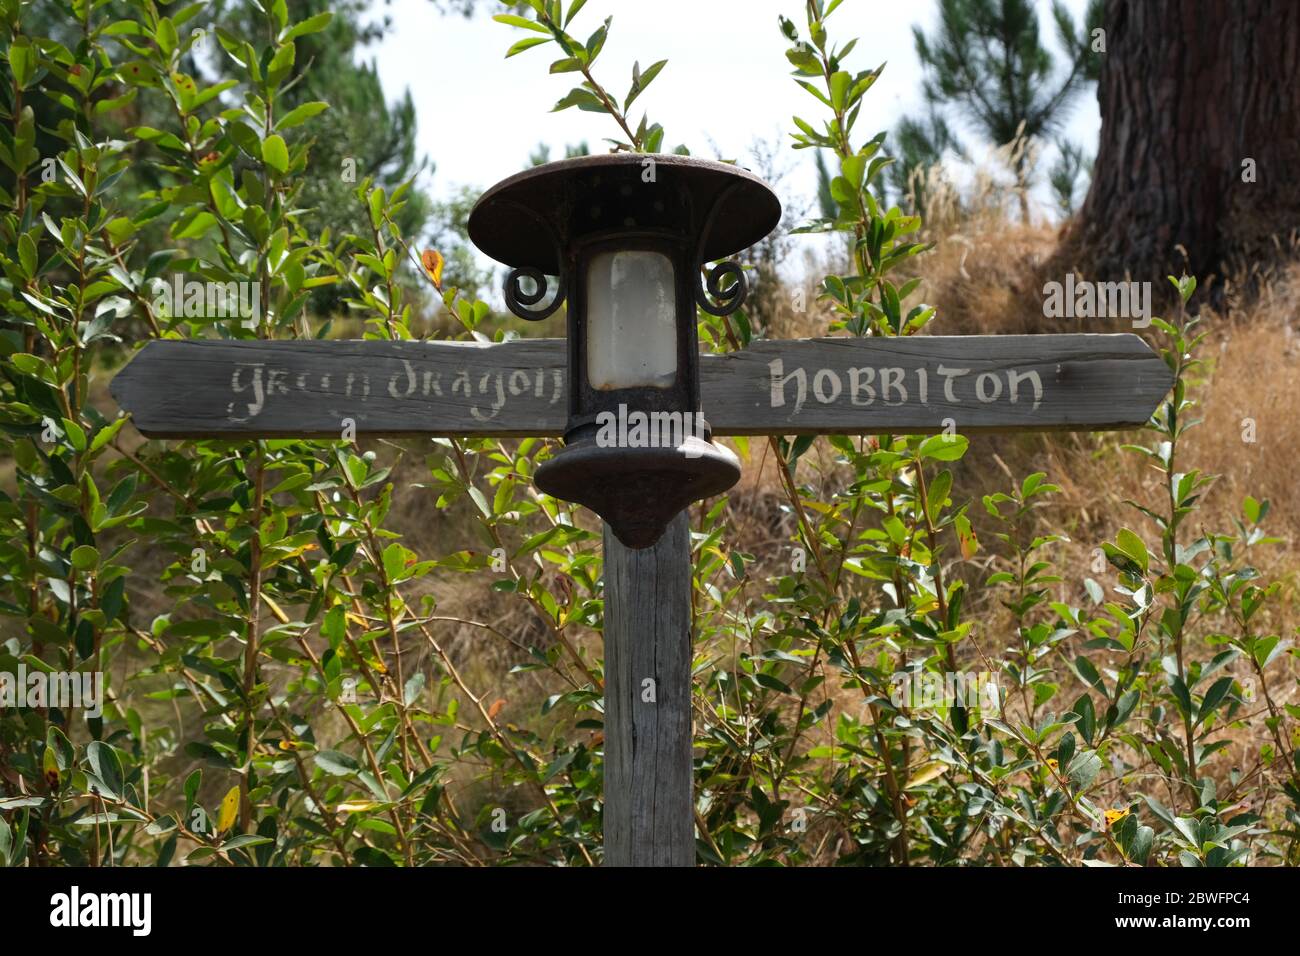 Green Dragon and Hobbiton sign post, New Zealand, Middle Earth Stock Photo